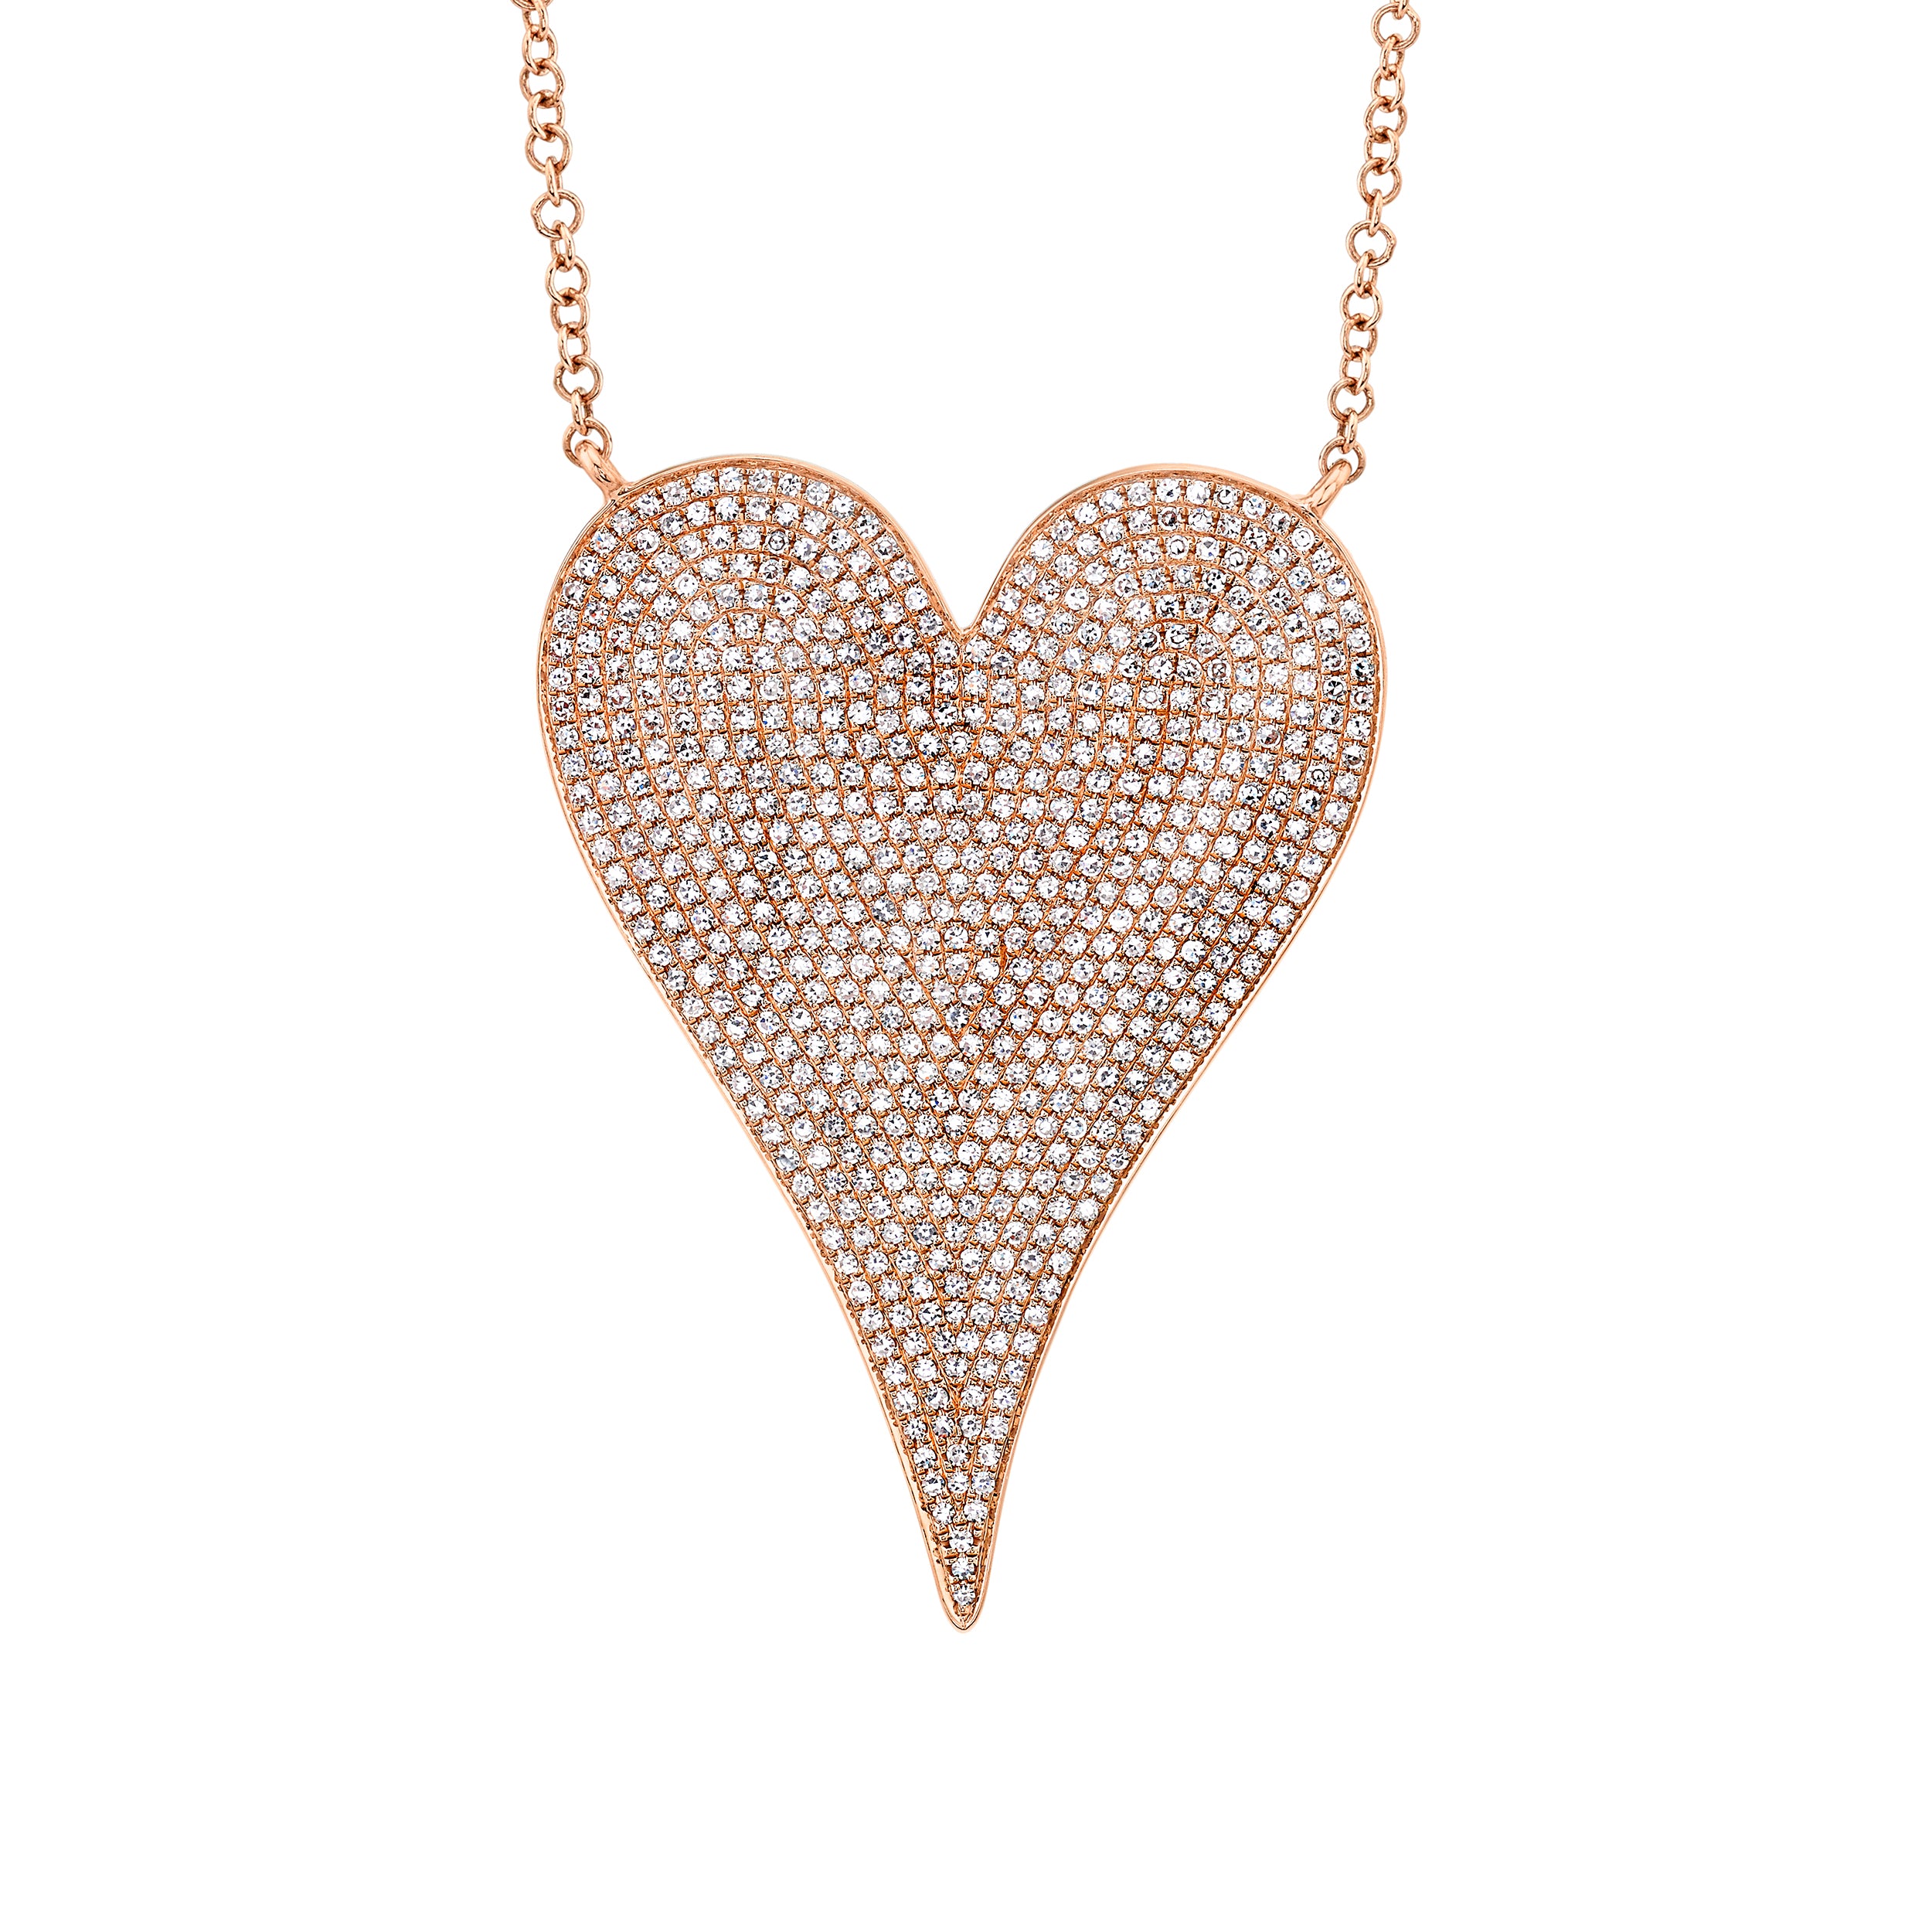 Jumbo Pave Heart Necklace 14K Rose Gold